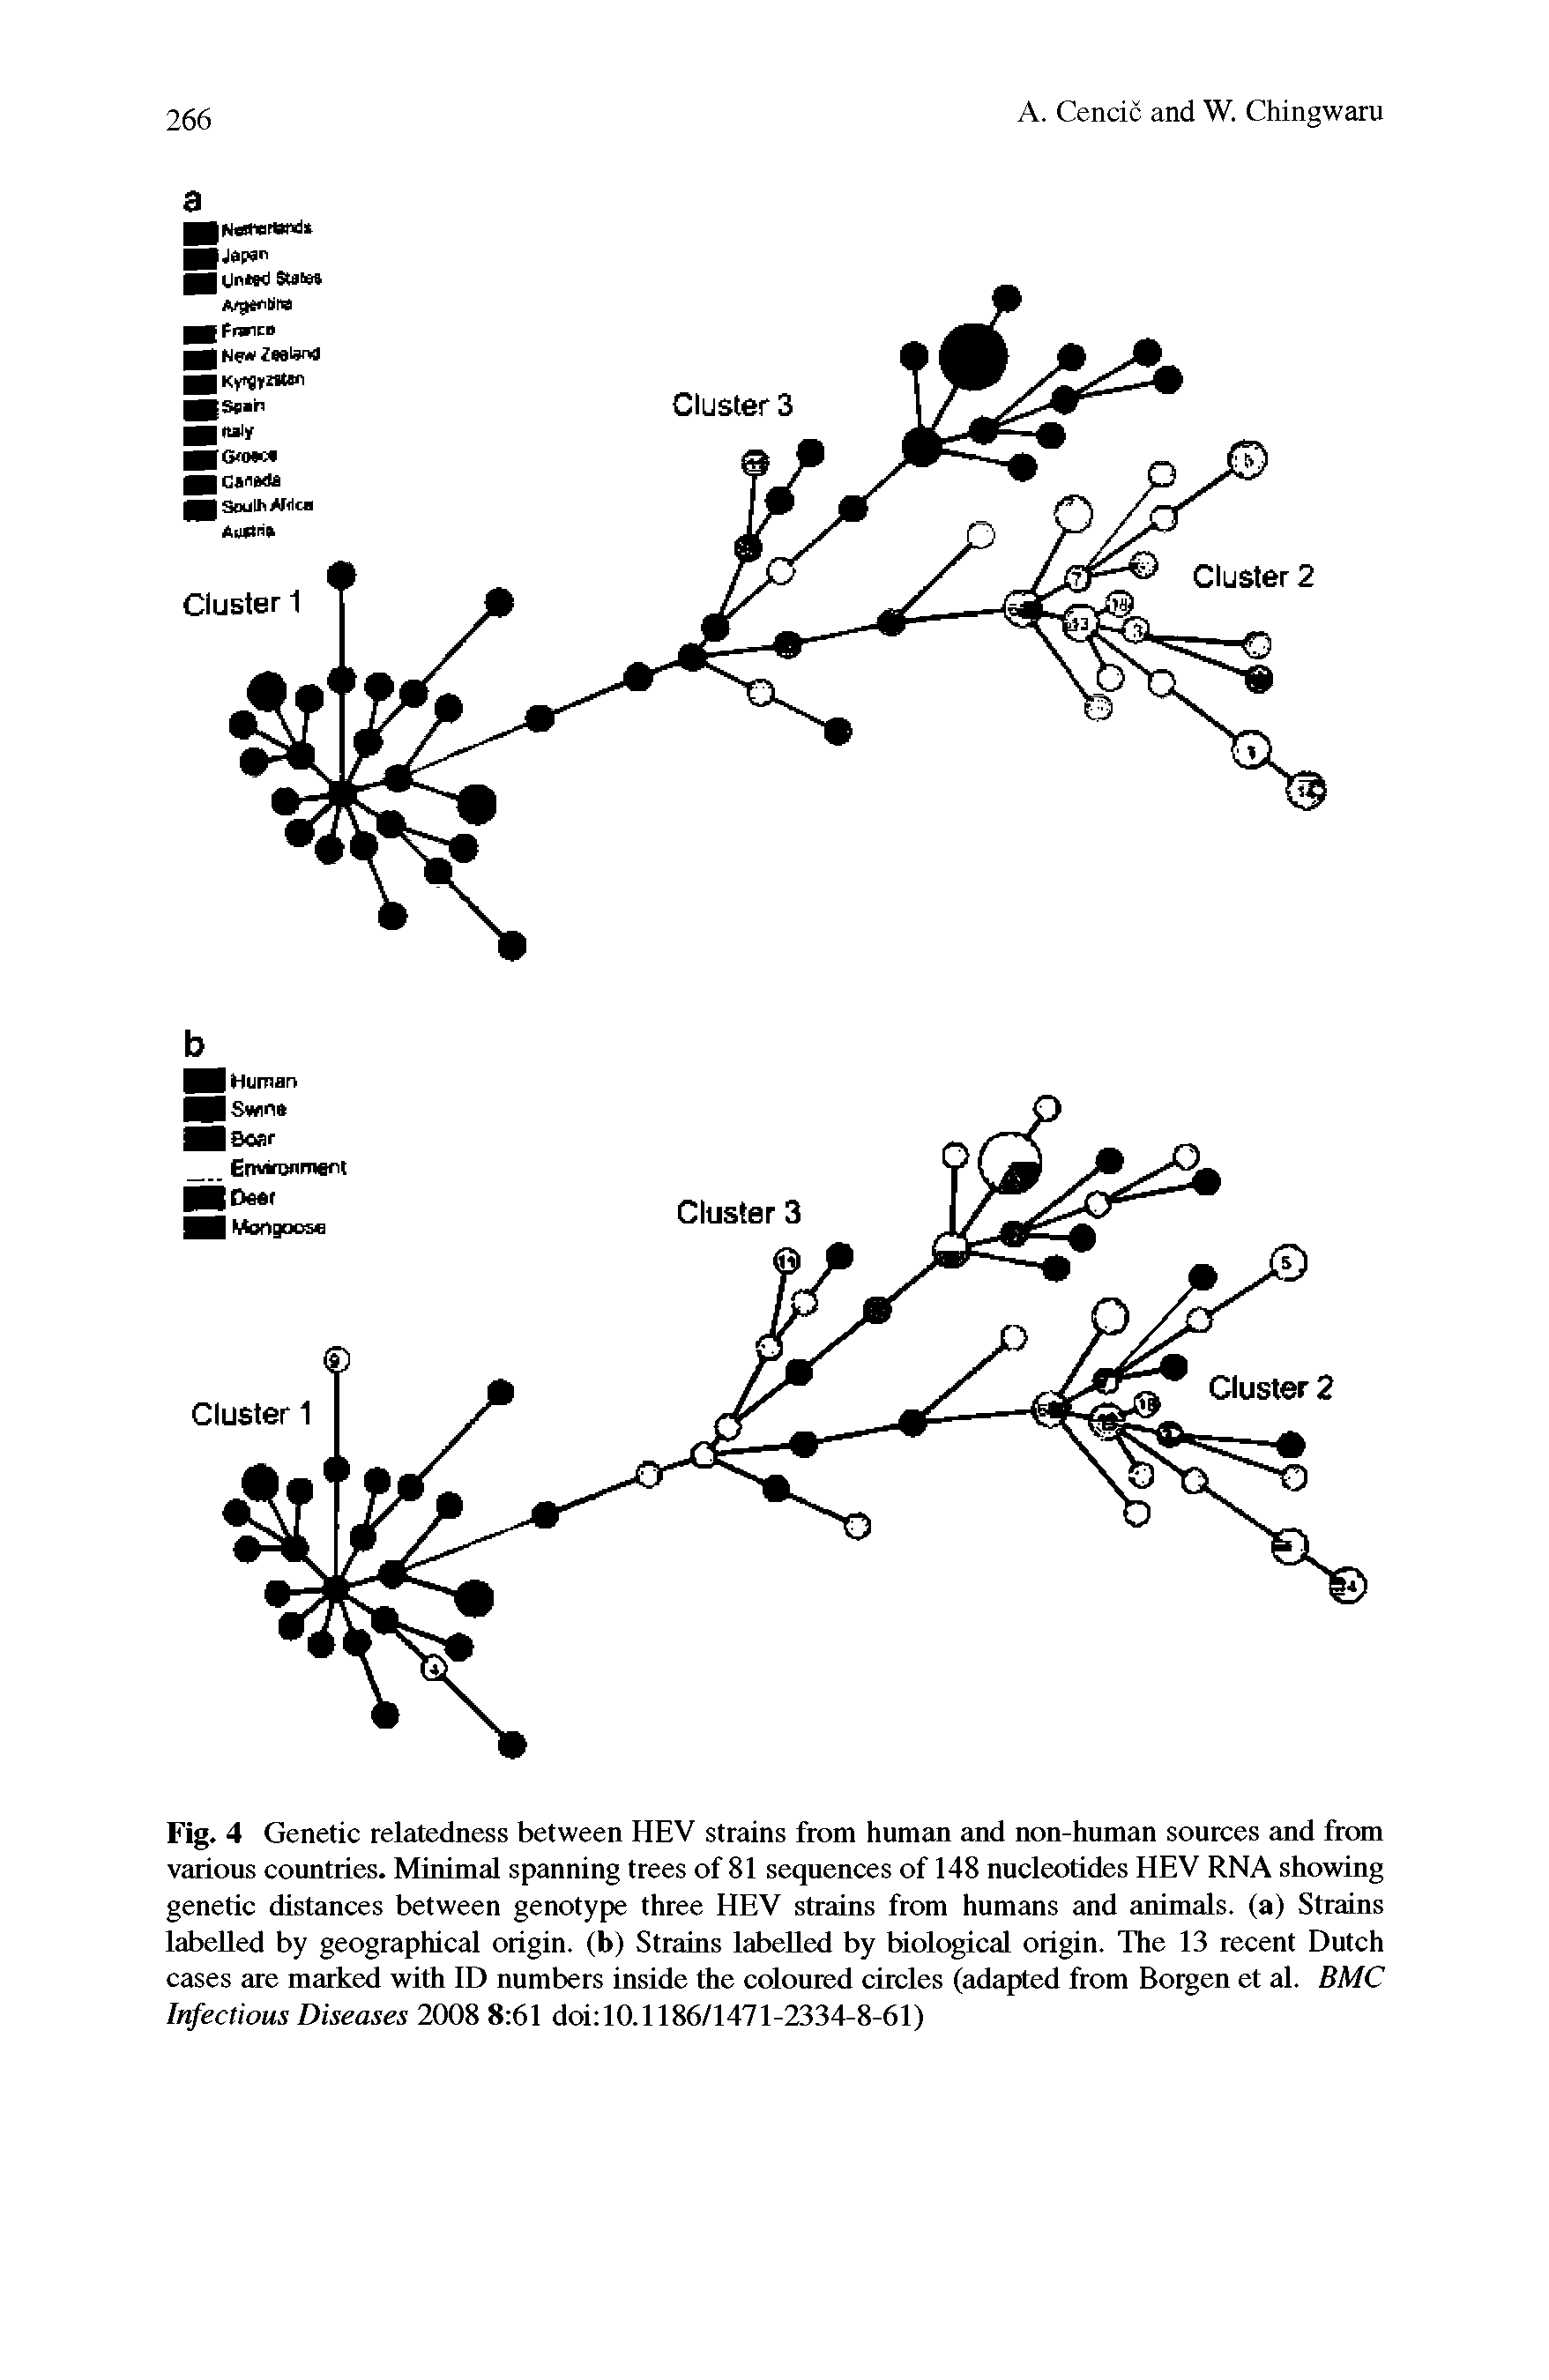 Fig. 4 Genetic relatedness between HEV strains from human and non-human sources and from various countries. Minimal spanning trees of 81 sequences of 148 nucleotides HEV RNA showing genetic distances between genotype three HEV strains from humans and animals, (a) Strains labelled by geographical origin, (b) Strains labelled by biological origin. The 13 recent Dutch cases are marked with ID numbers inside the coloured circles (adapted from Bergen et al. BMC Infectious Diseases 2008 8 61 doi 10.1186/1471-2334-8-61)...